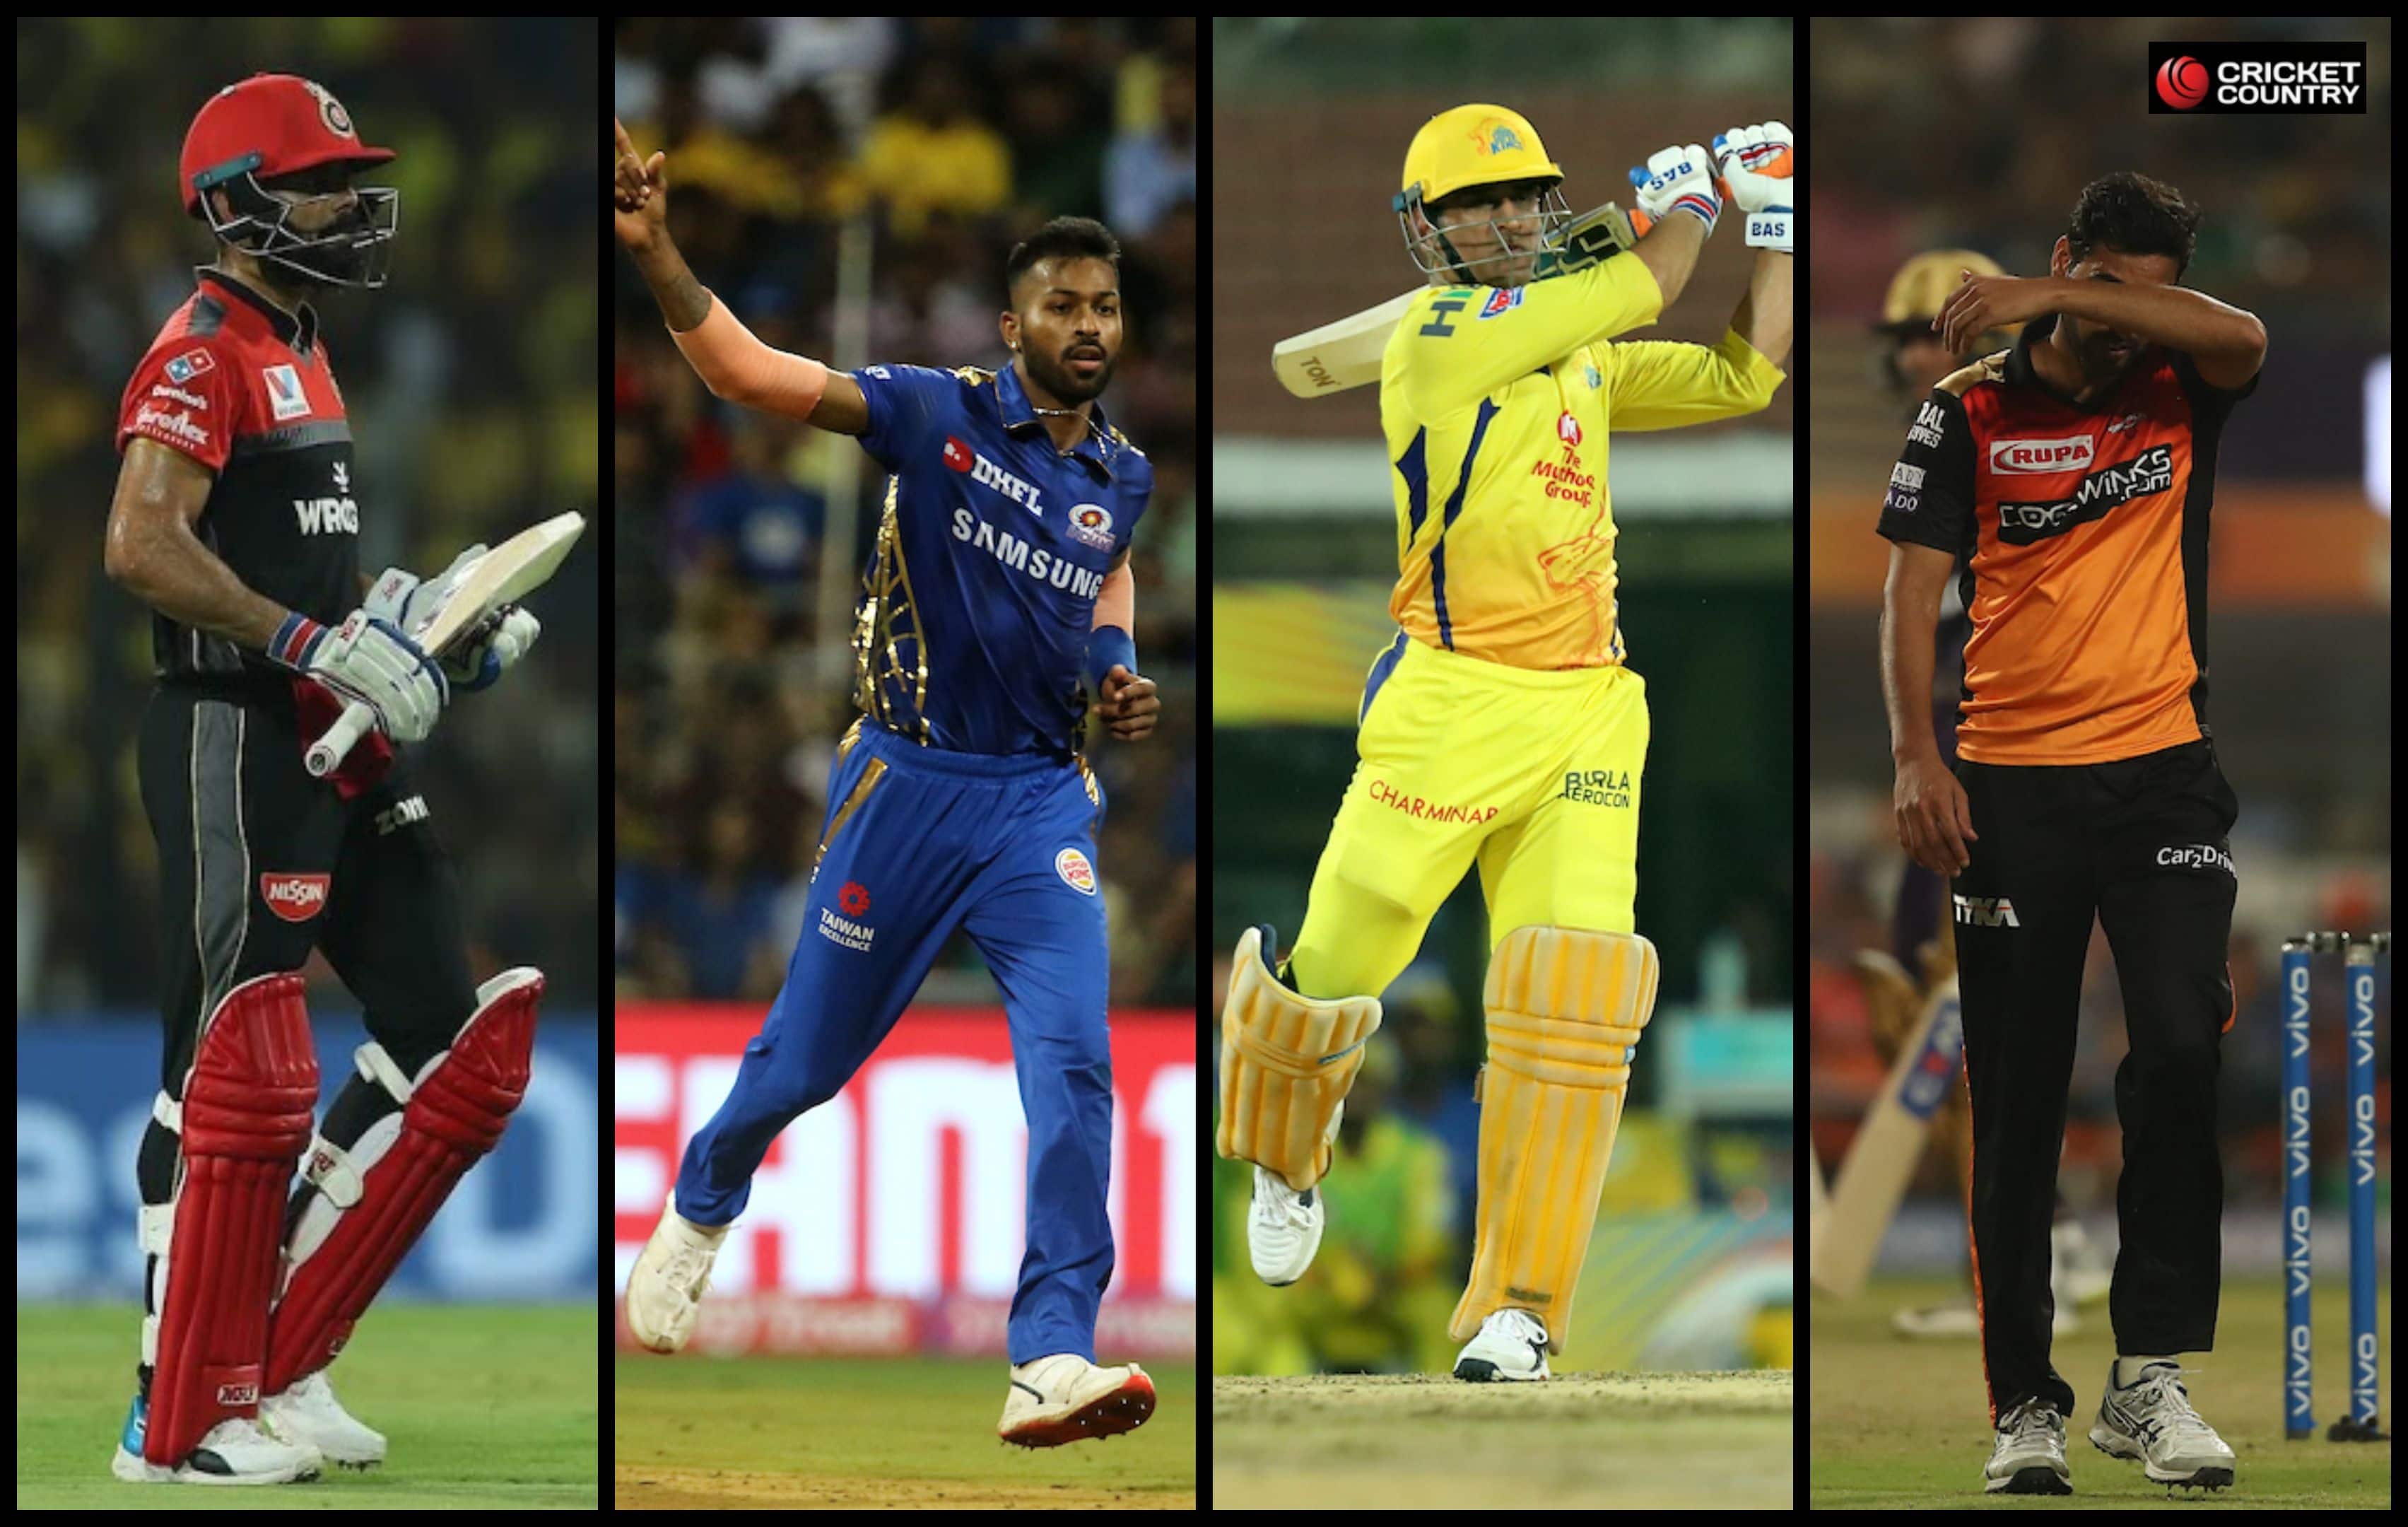 IPL 2019: How have India’s World Cup probables fared?